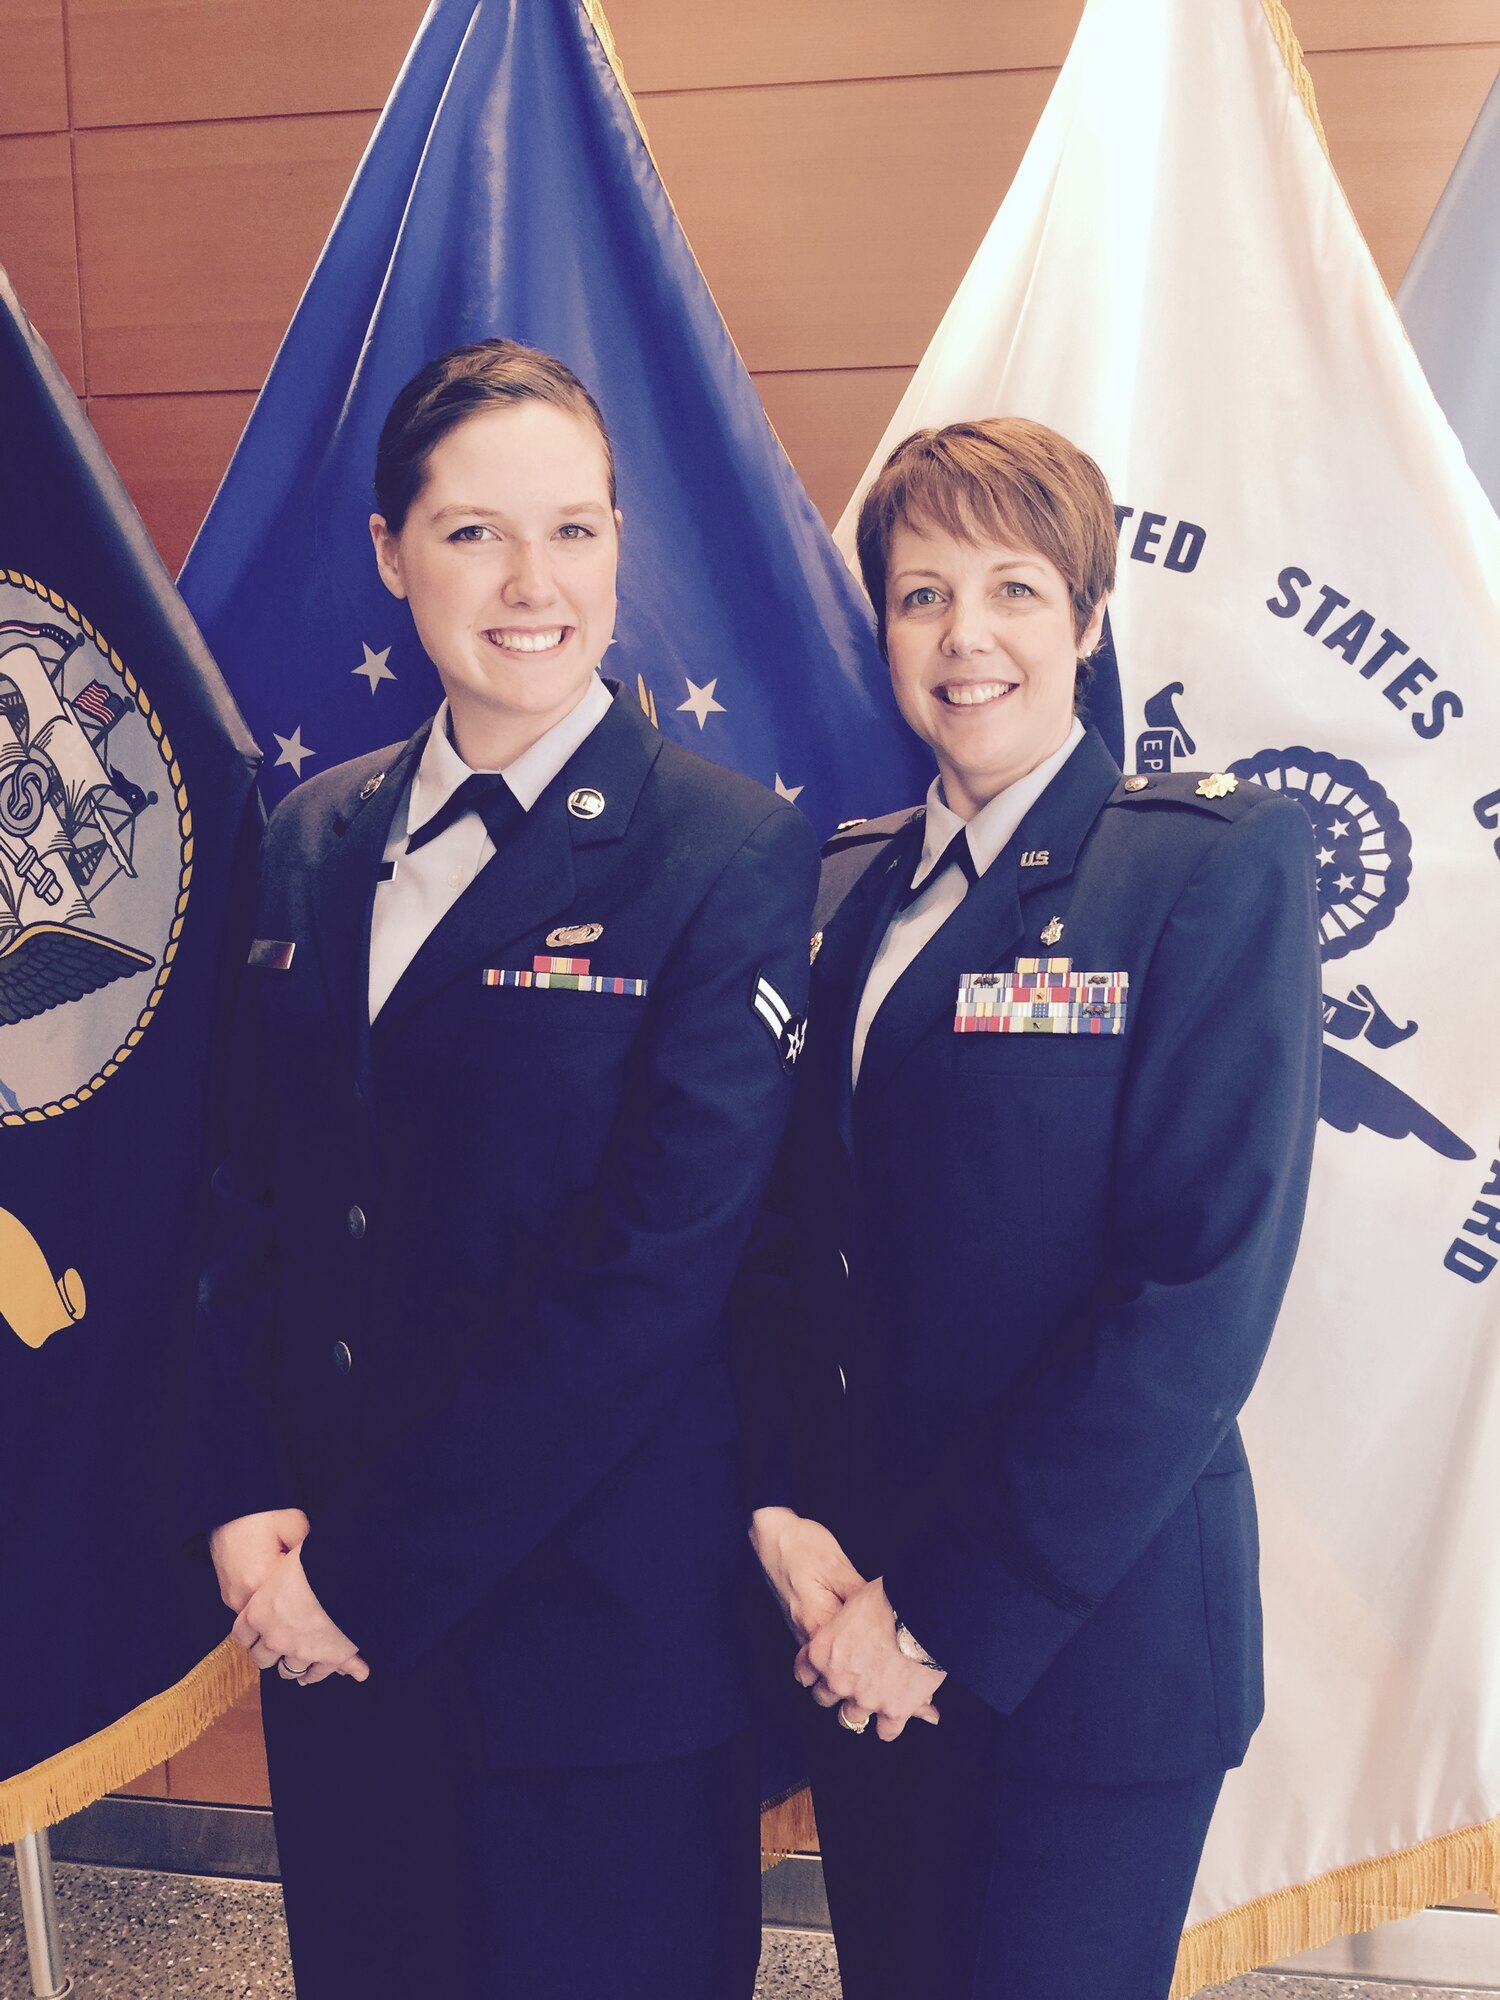 Then Airman 1st Class Kara Watts and her mother, Maj. Tobie Wethington, pose for a photo at the Air Force surgeon general promotion at the Defense Health Headquarters in Falls Church, Va., earlier this year. Watts, now a senior airman and a 66th Comptroller Squadron administration specialist, as well as her mother, who is an Information Management Information Technology fellow at the Defense Information Systems Agency, are both currently serving on active duty. (Courtesy photo)